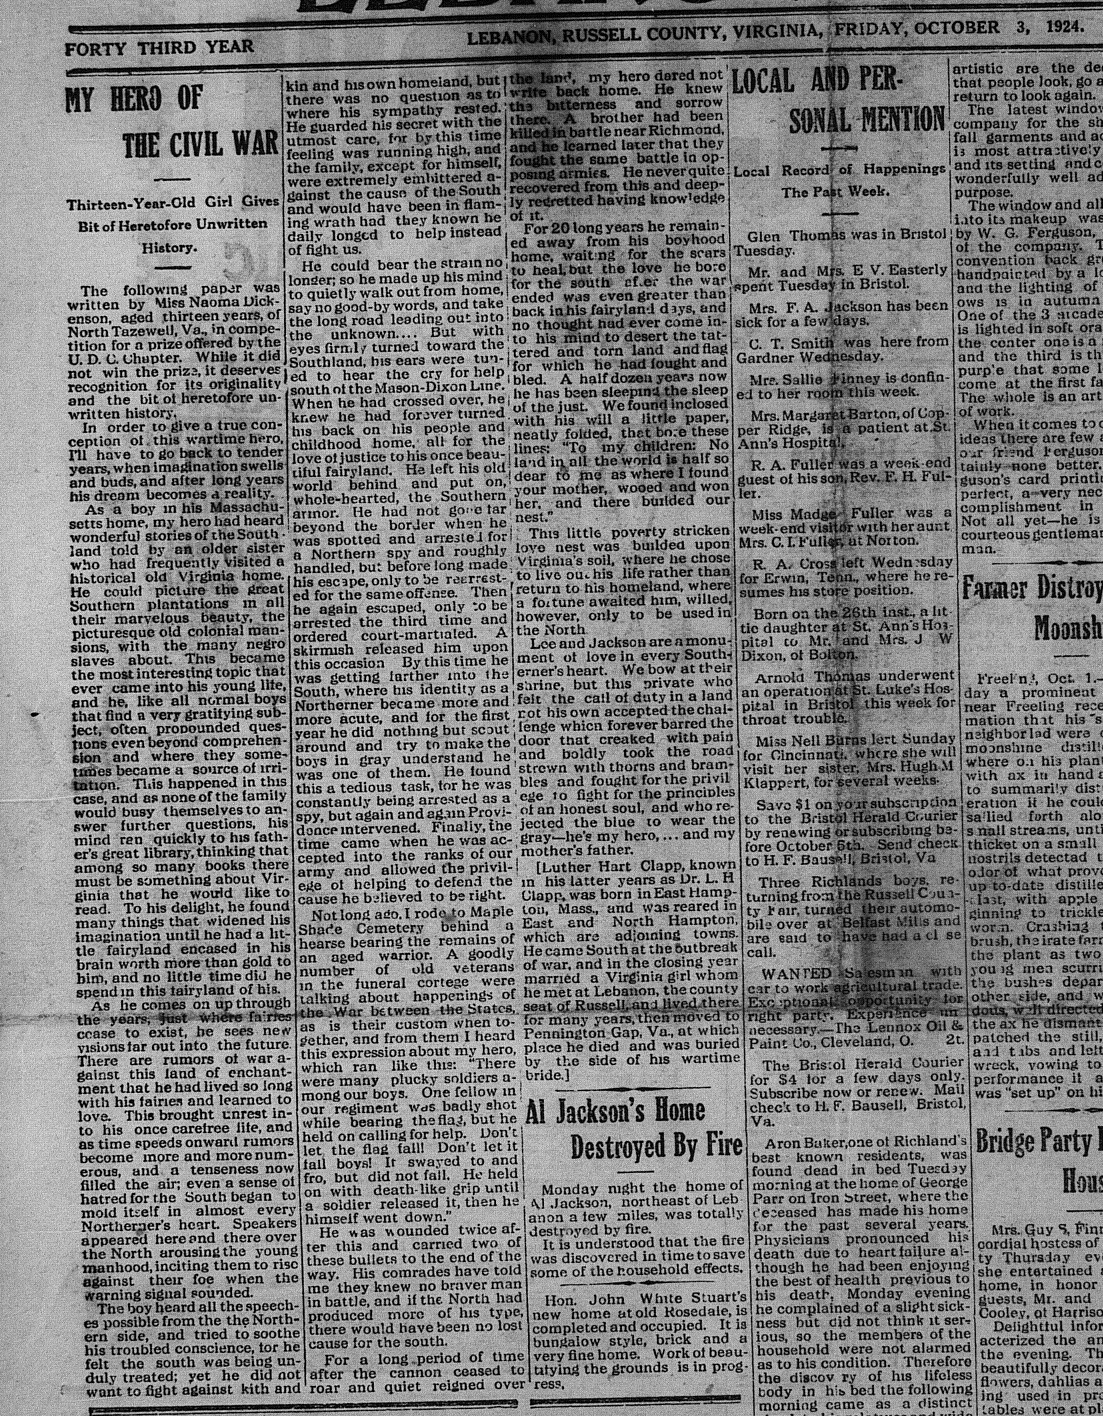 Newspaper Articles - Russell County, Virginia History - Slaves and